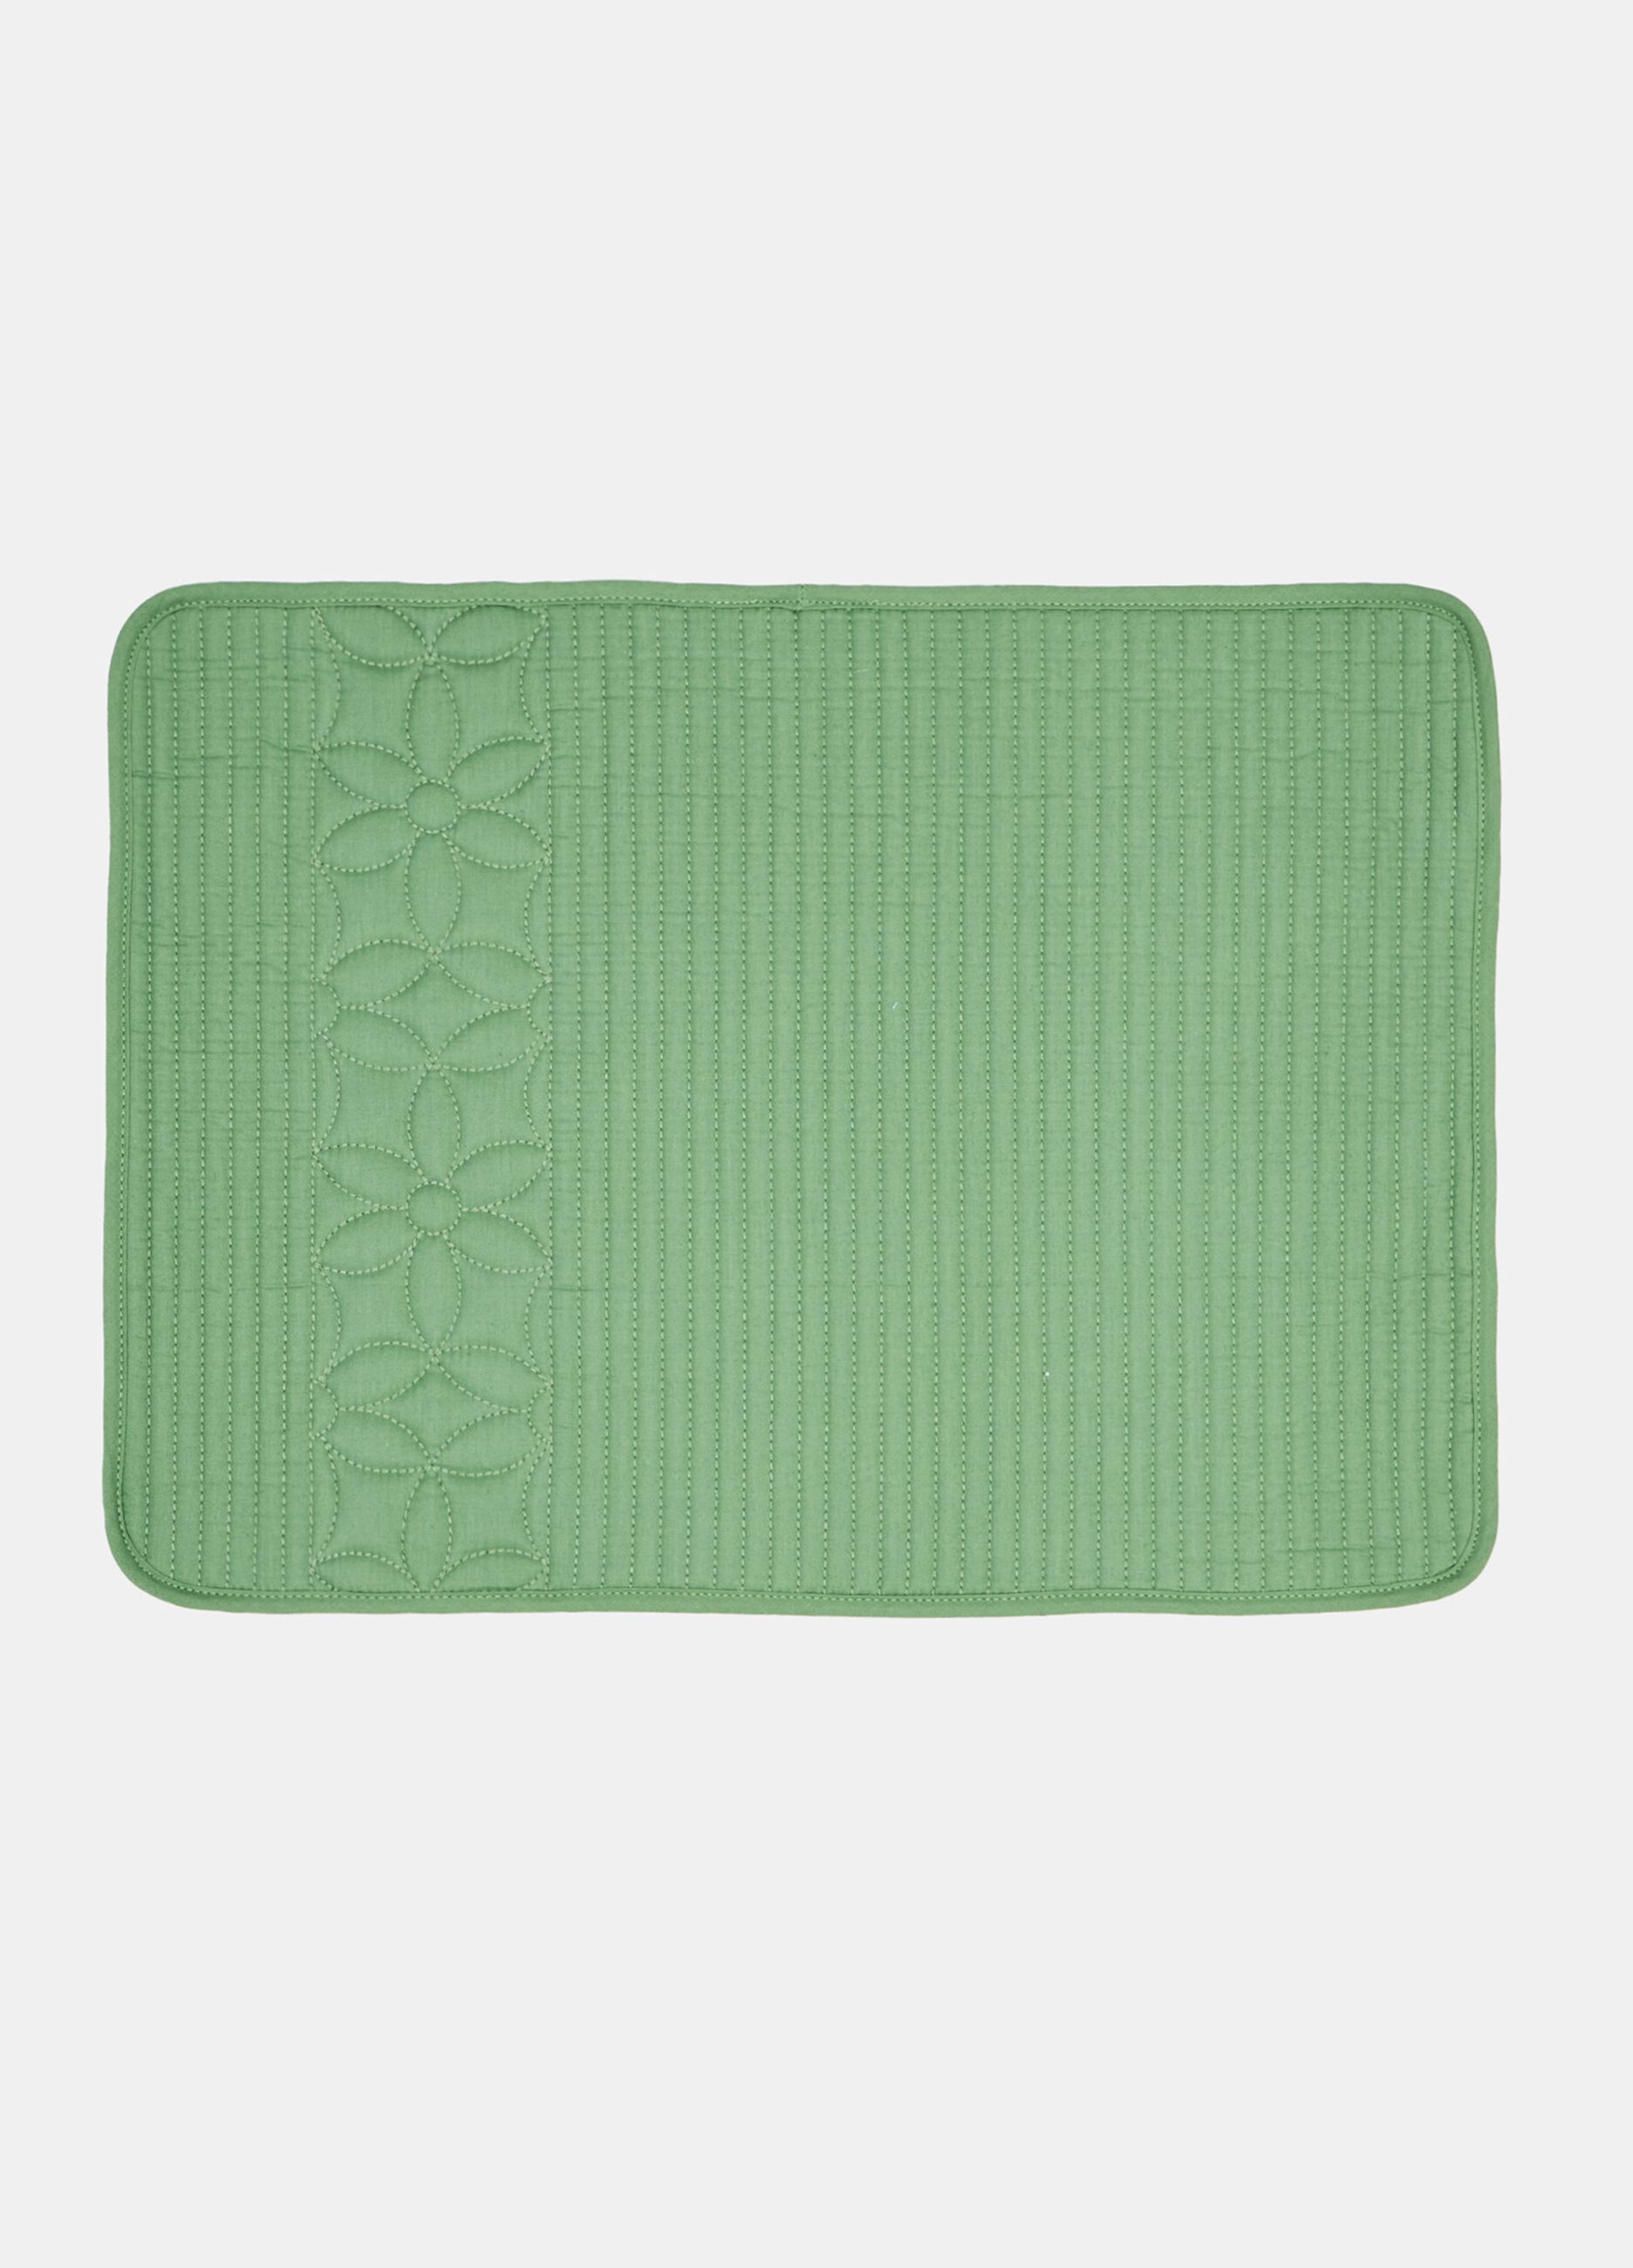 Breakfast table mat with design